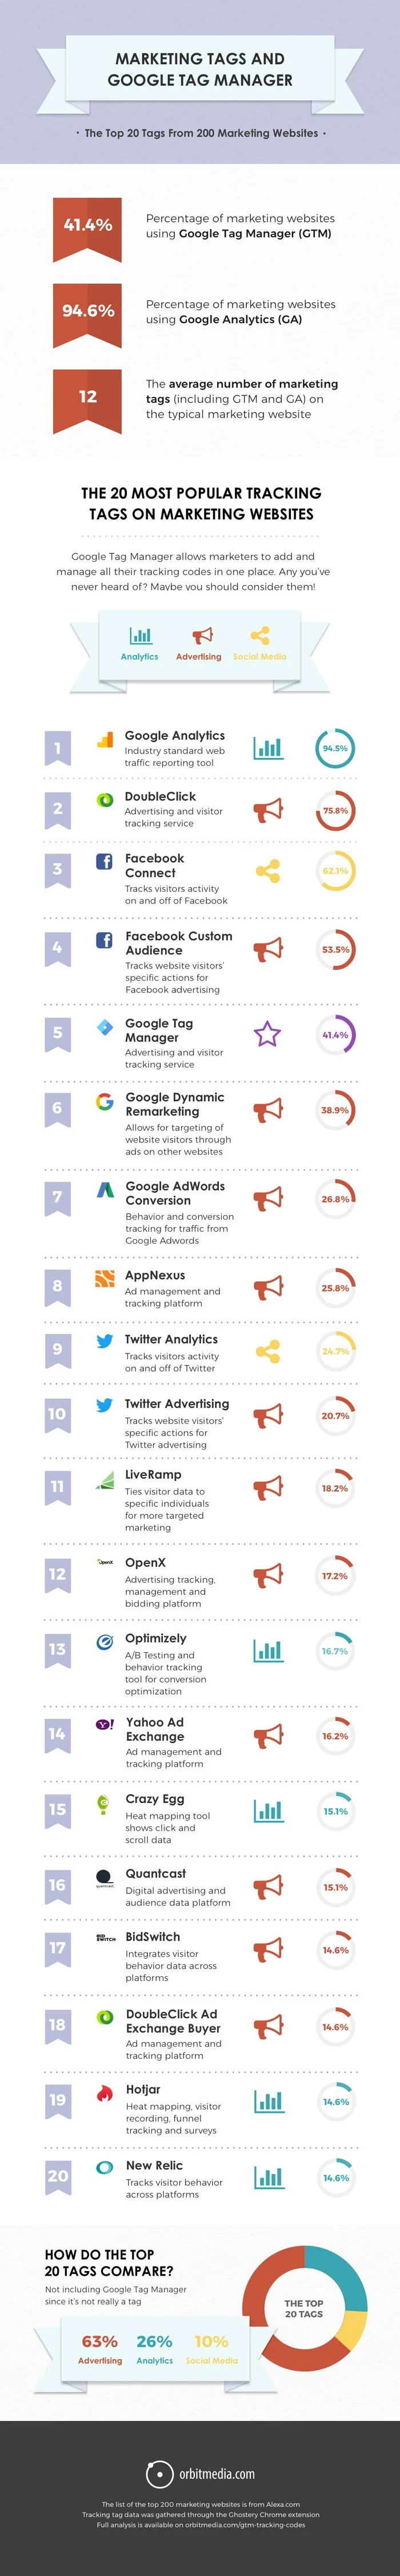 Marketing Tags and Google Tag Manager: The Top 20 Tags From The Top 200 Marketing Sites - #infographic